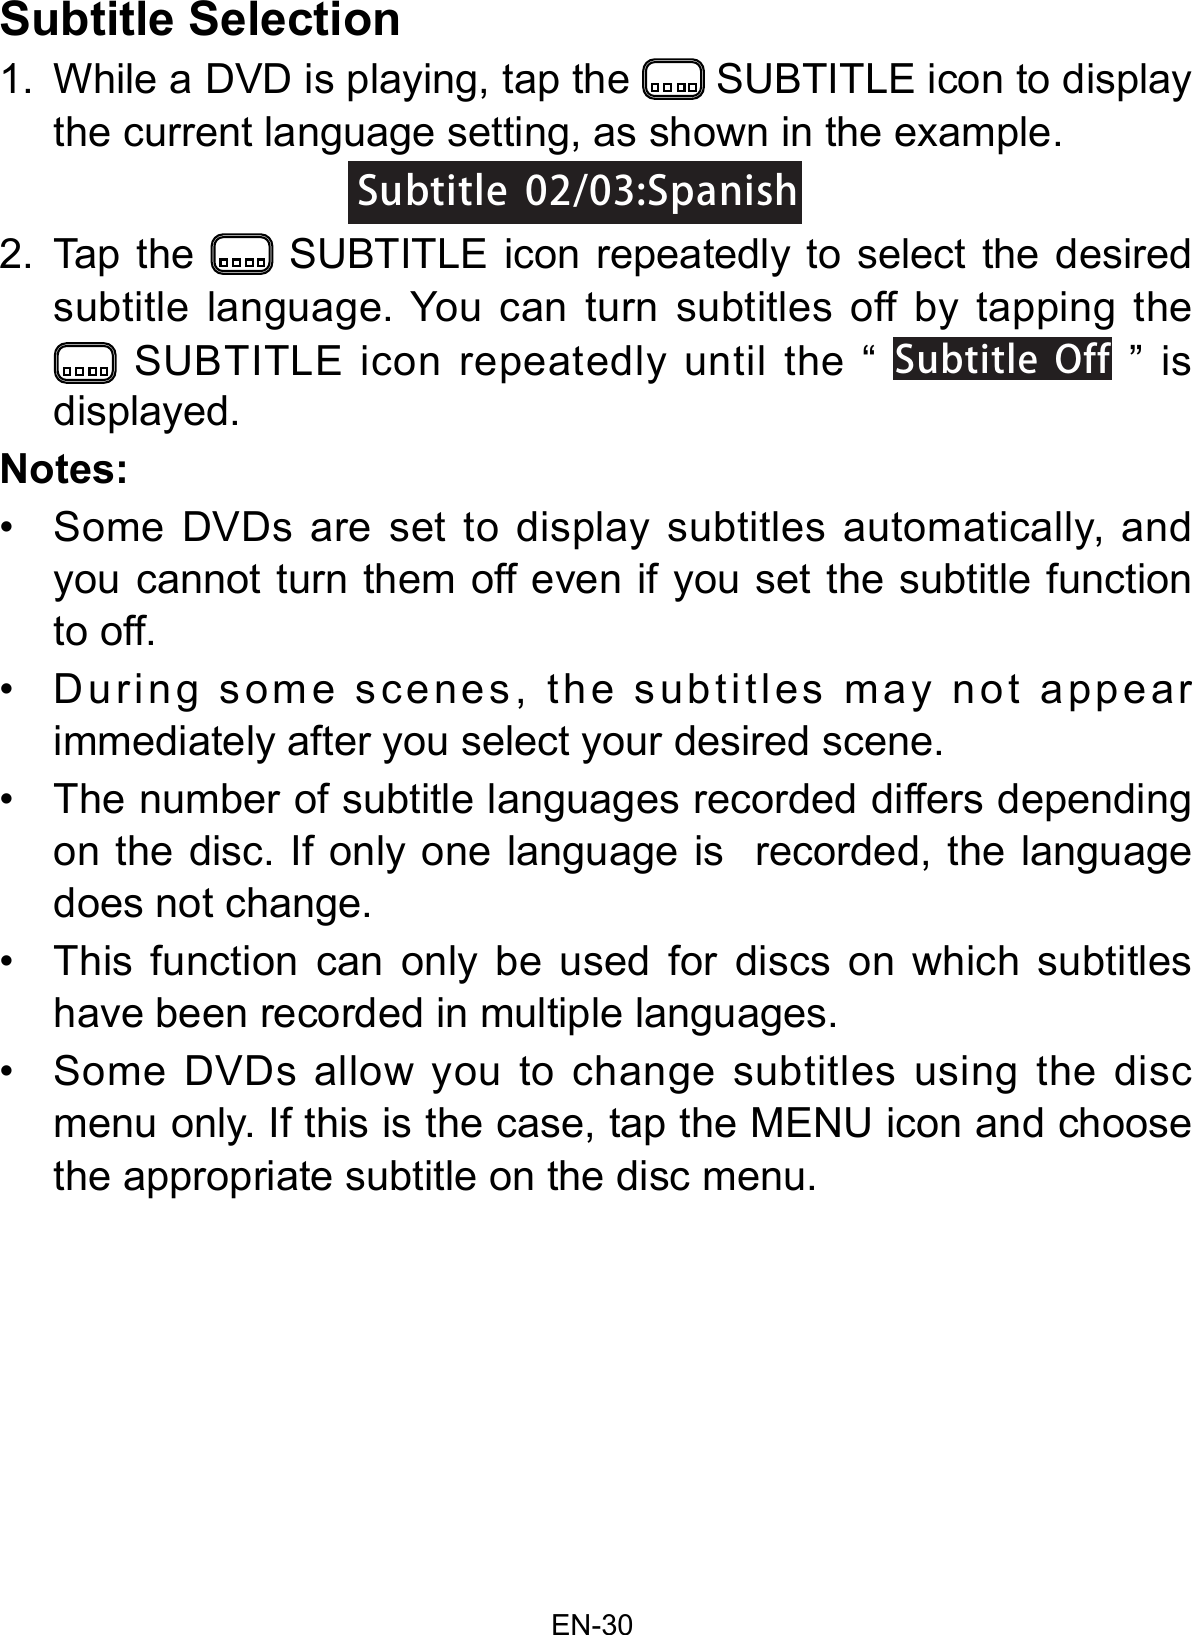 EN-30Subtitle Selection1. While a DVD is playing, tap the  SUBTITLE icon to display the current language setting, as shown in the example.2. Tap  the   SUBTITLE icon repeatedly to select the desiredsubtitle language. You can turn subtitles off by tapping the SUBTITLE icon repeatedly until the “ SubtitleOff ” is displayed.Notes:• Some  DVDs  are  set  to  display  subtitles  automatically,  andyou cannot turn them off even if you set the subtitle functionto off.• During  some  scenes,  the  subtitles  may  not  appearimmediately after you select your desired scene.• The number of subtitle languages recorded differs dependingon the disc. If only one language is  recorded, the languagedoes not change.• This  function  can  only  be  used  for  discs  on  which  subtitleshave been recorded in multiple languages.• Some  DVDs  allow  you  to  change  subtitles  using  the  discmenu only. If this is the case, tap the MENU icon and choosethe appropriate subtitle on the disc menu.Subtitle02/03:SpanishSubtitle02/03:Spanish